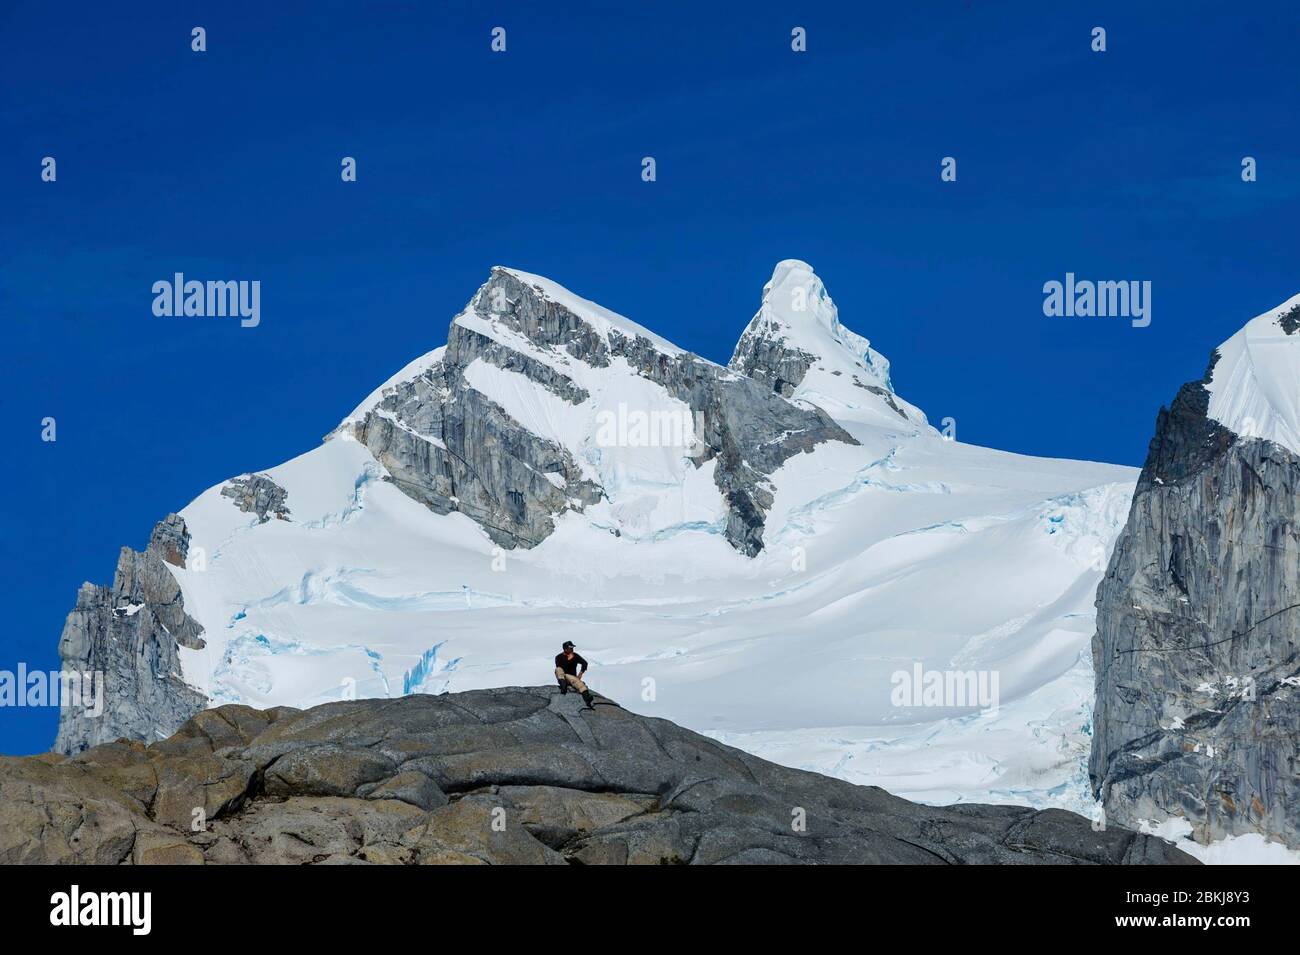 Chile, Patagonia, Aysen, Coyhaique, the Patagonian guide Ocho under the glaciers of St Valentin Stock Photo